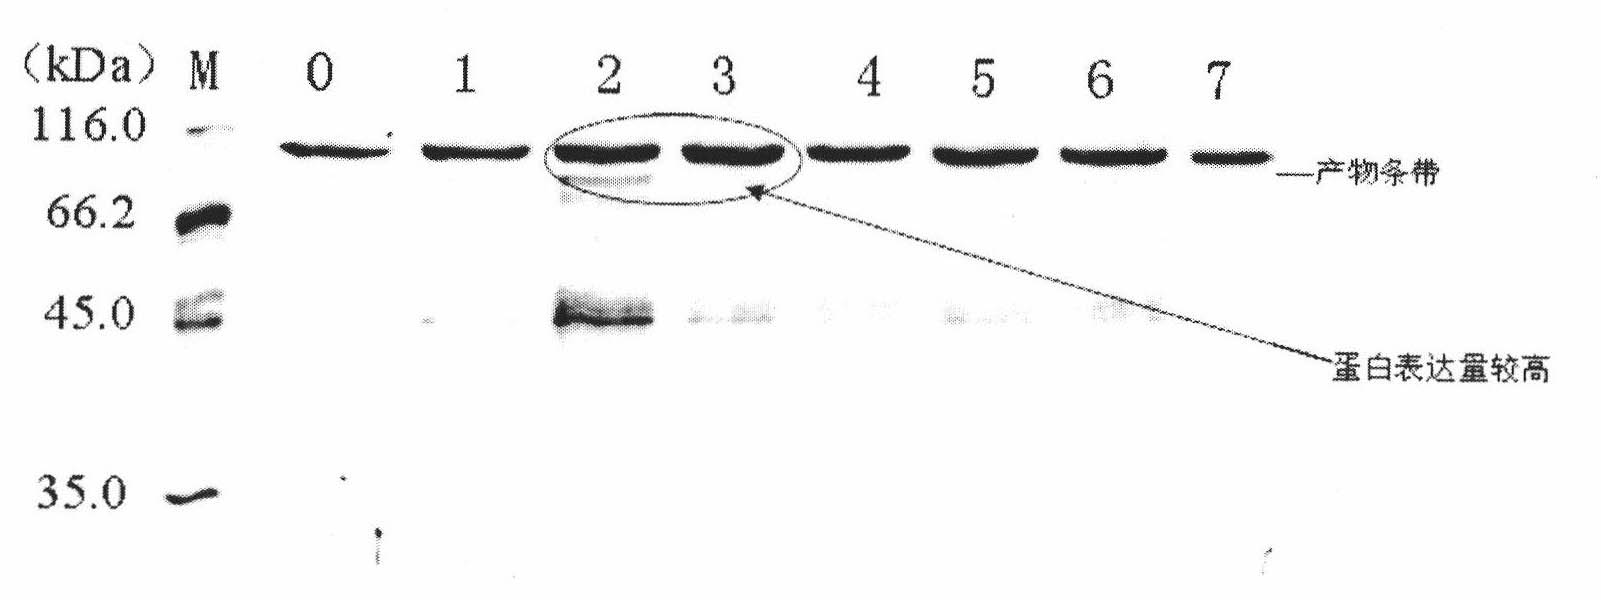 Method for improving expression level of Pichia pastoris recombinant protein